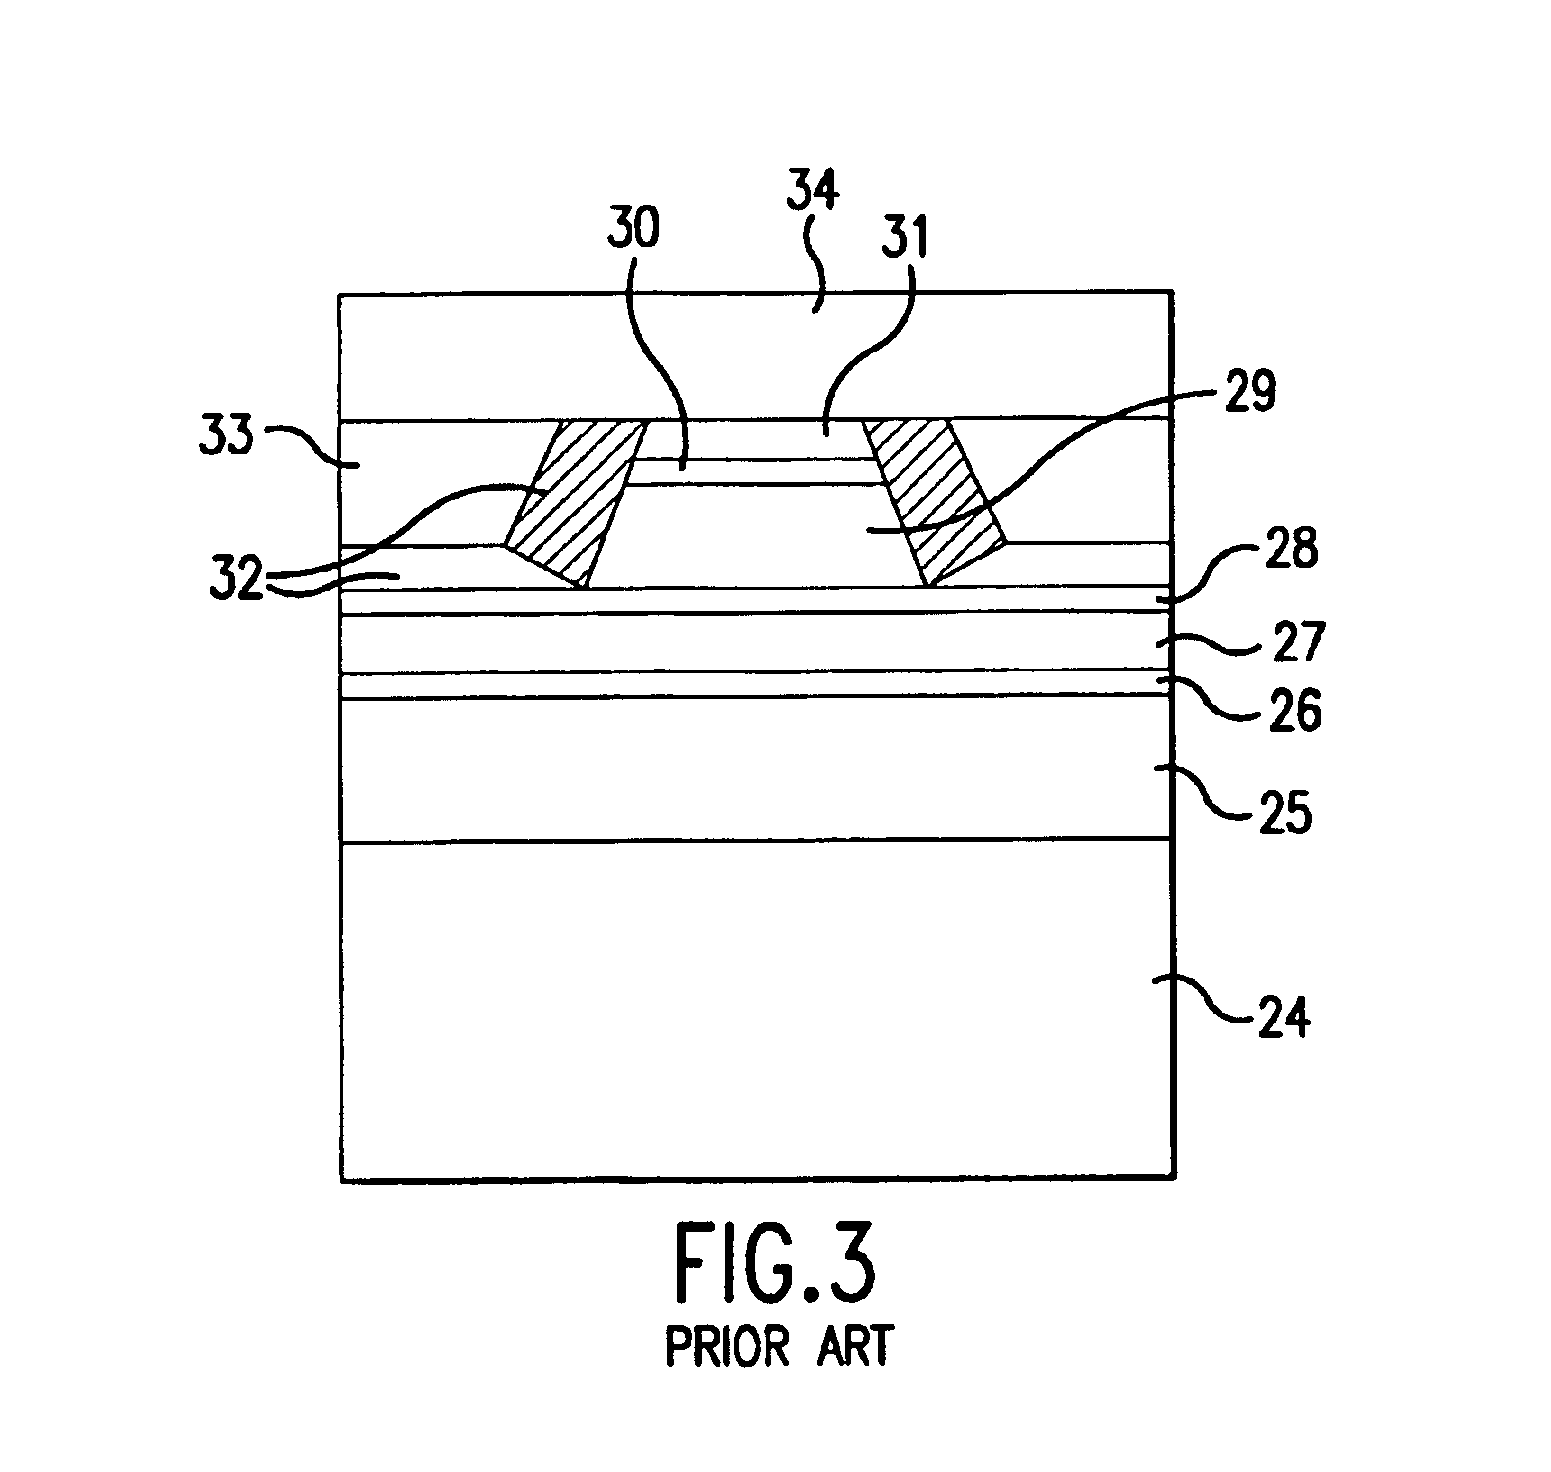 Laser diode and semiconductor light-emitting device producing visible-wavelength radiation